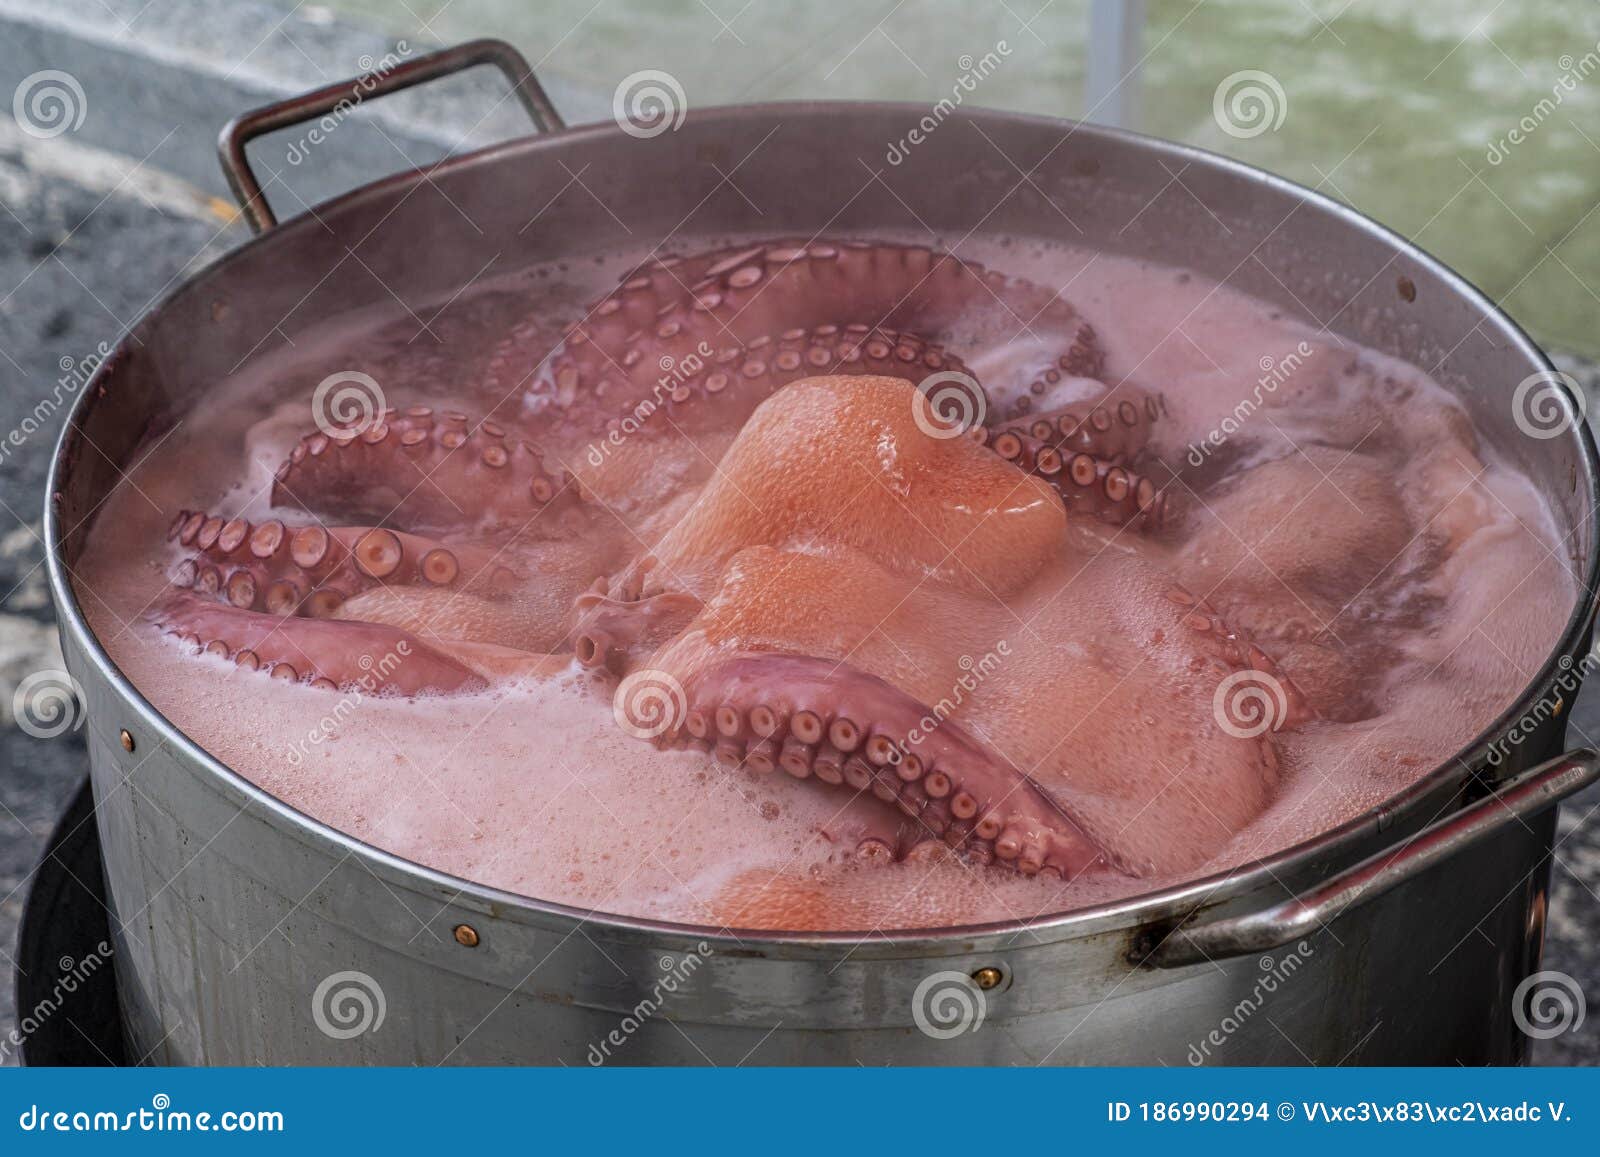 octopus cooked in the pot, traditional recipe of pulpo a feira. galicia, spain.